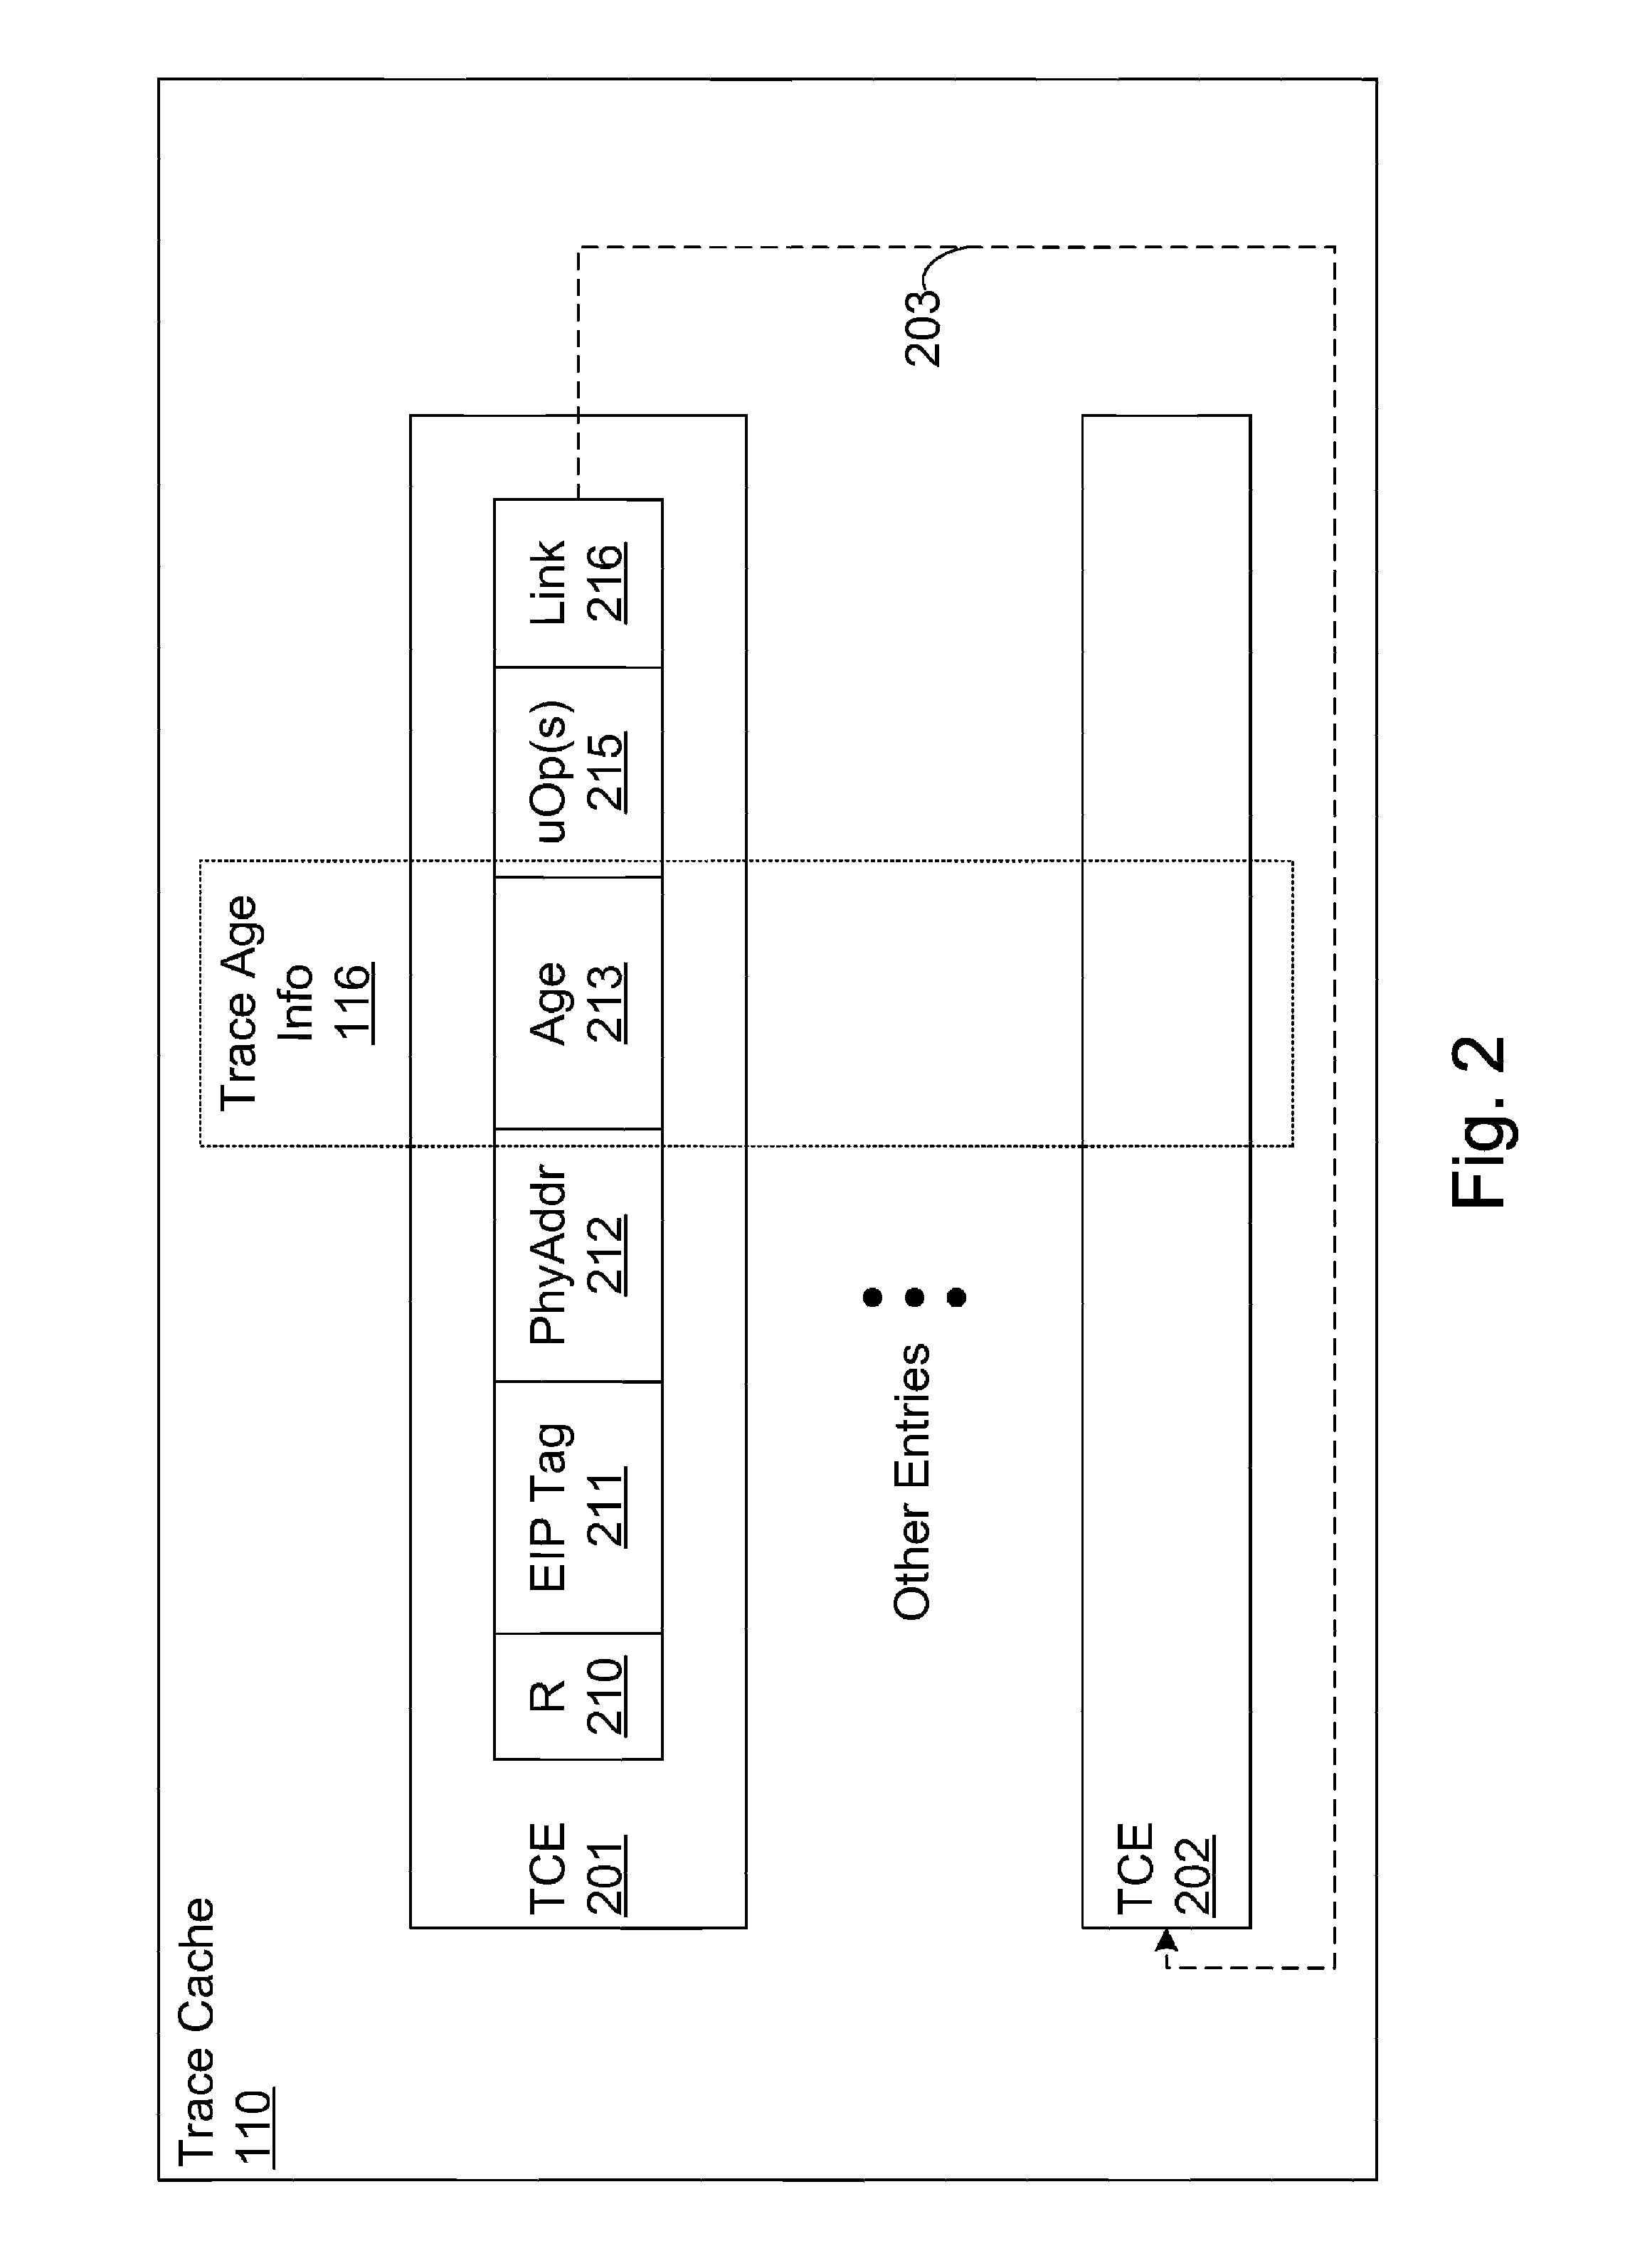 Trace cache for efficient self-modifying code processing